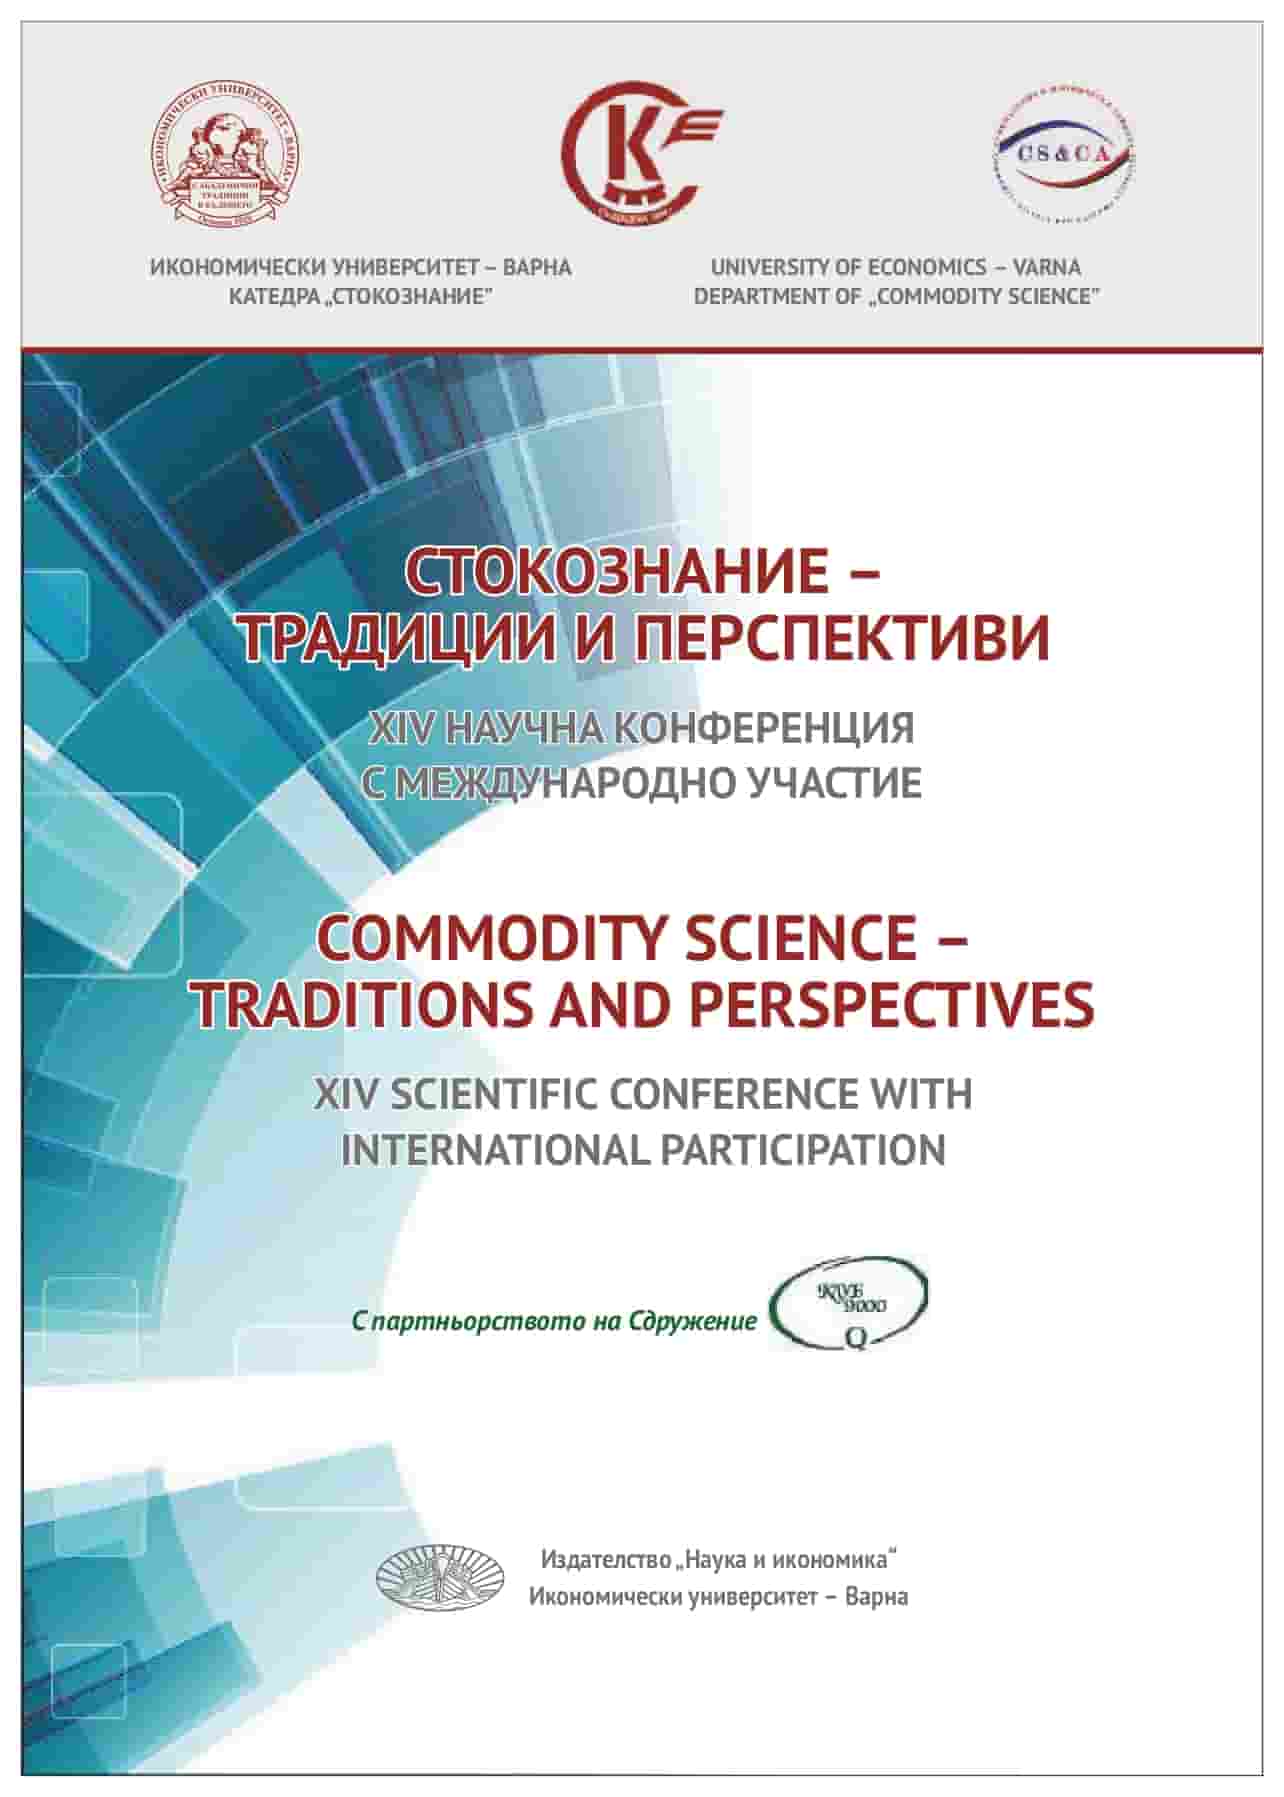 CREATION AND 75 YEARS OF DEPARTMENT OF THE DEPARTMENT AND SPECIALTY "COMMODITY SCIENCE" IN BULGARIA Cover Image